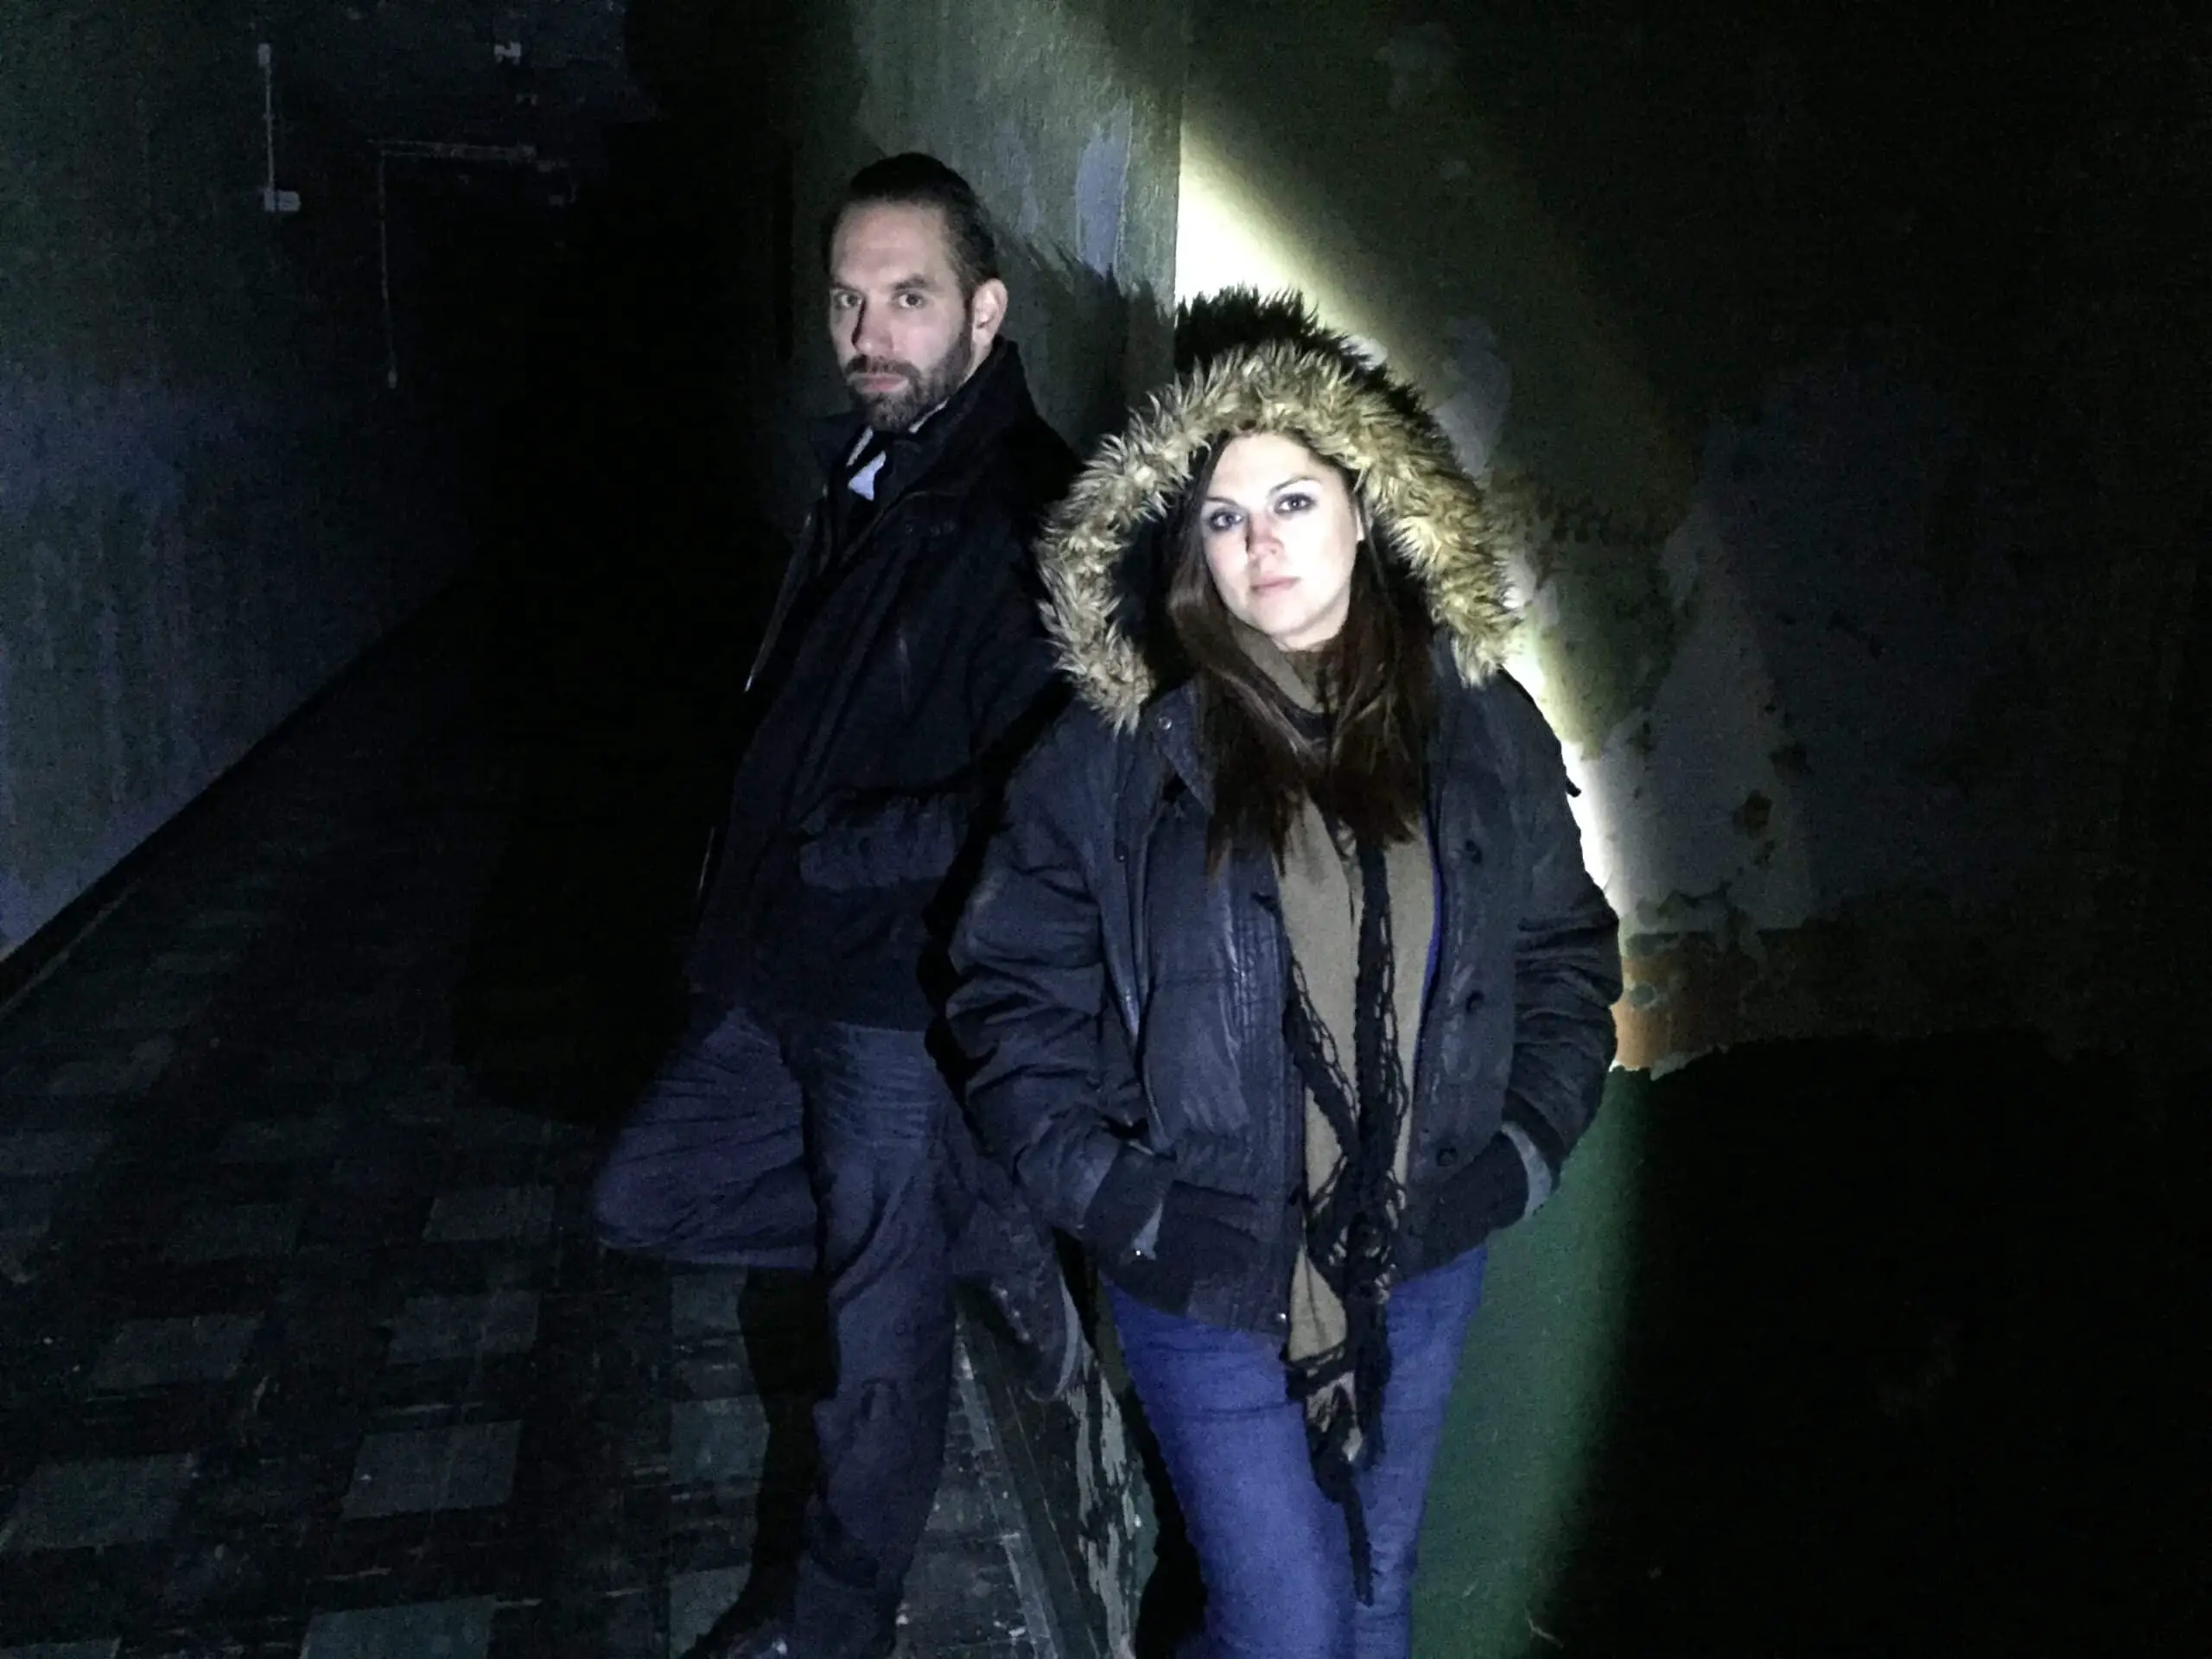 PARANORMAL LOCKDOWN: THE BLACK MONK HOUSE ON TLC OCT 31 at 9/8c